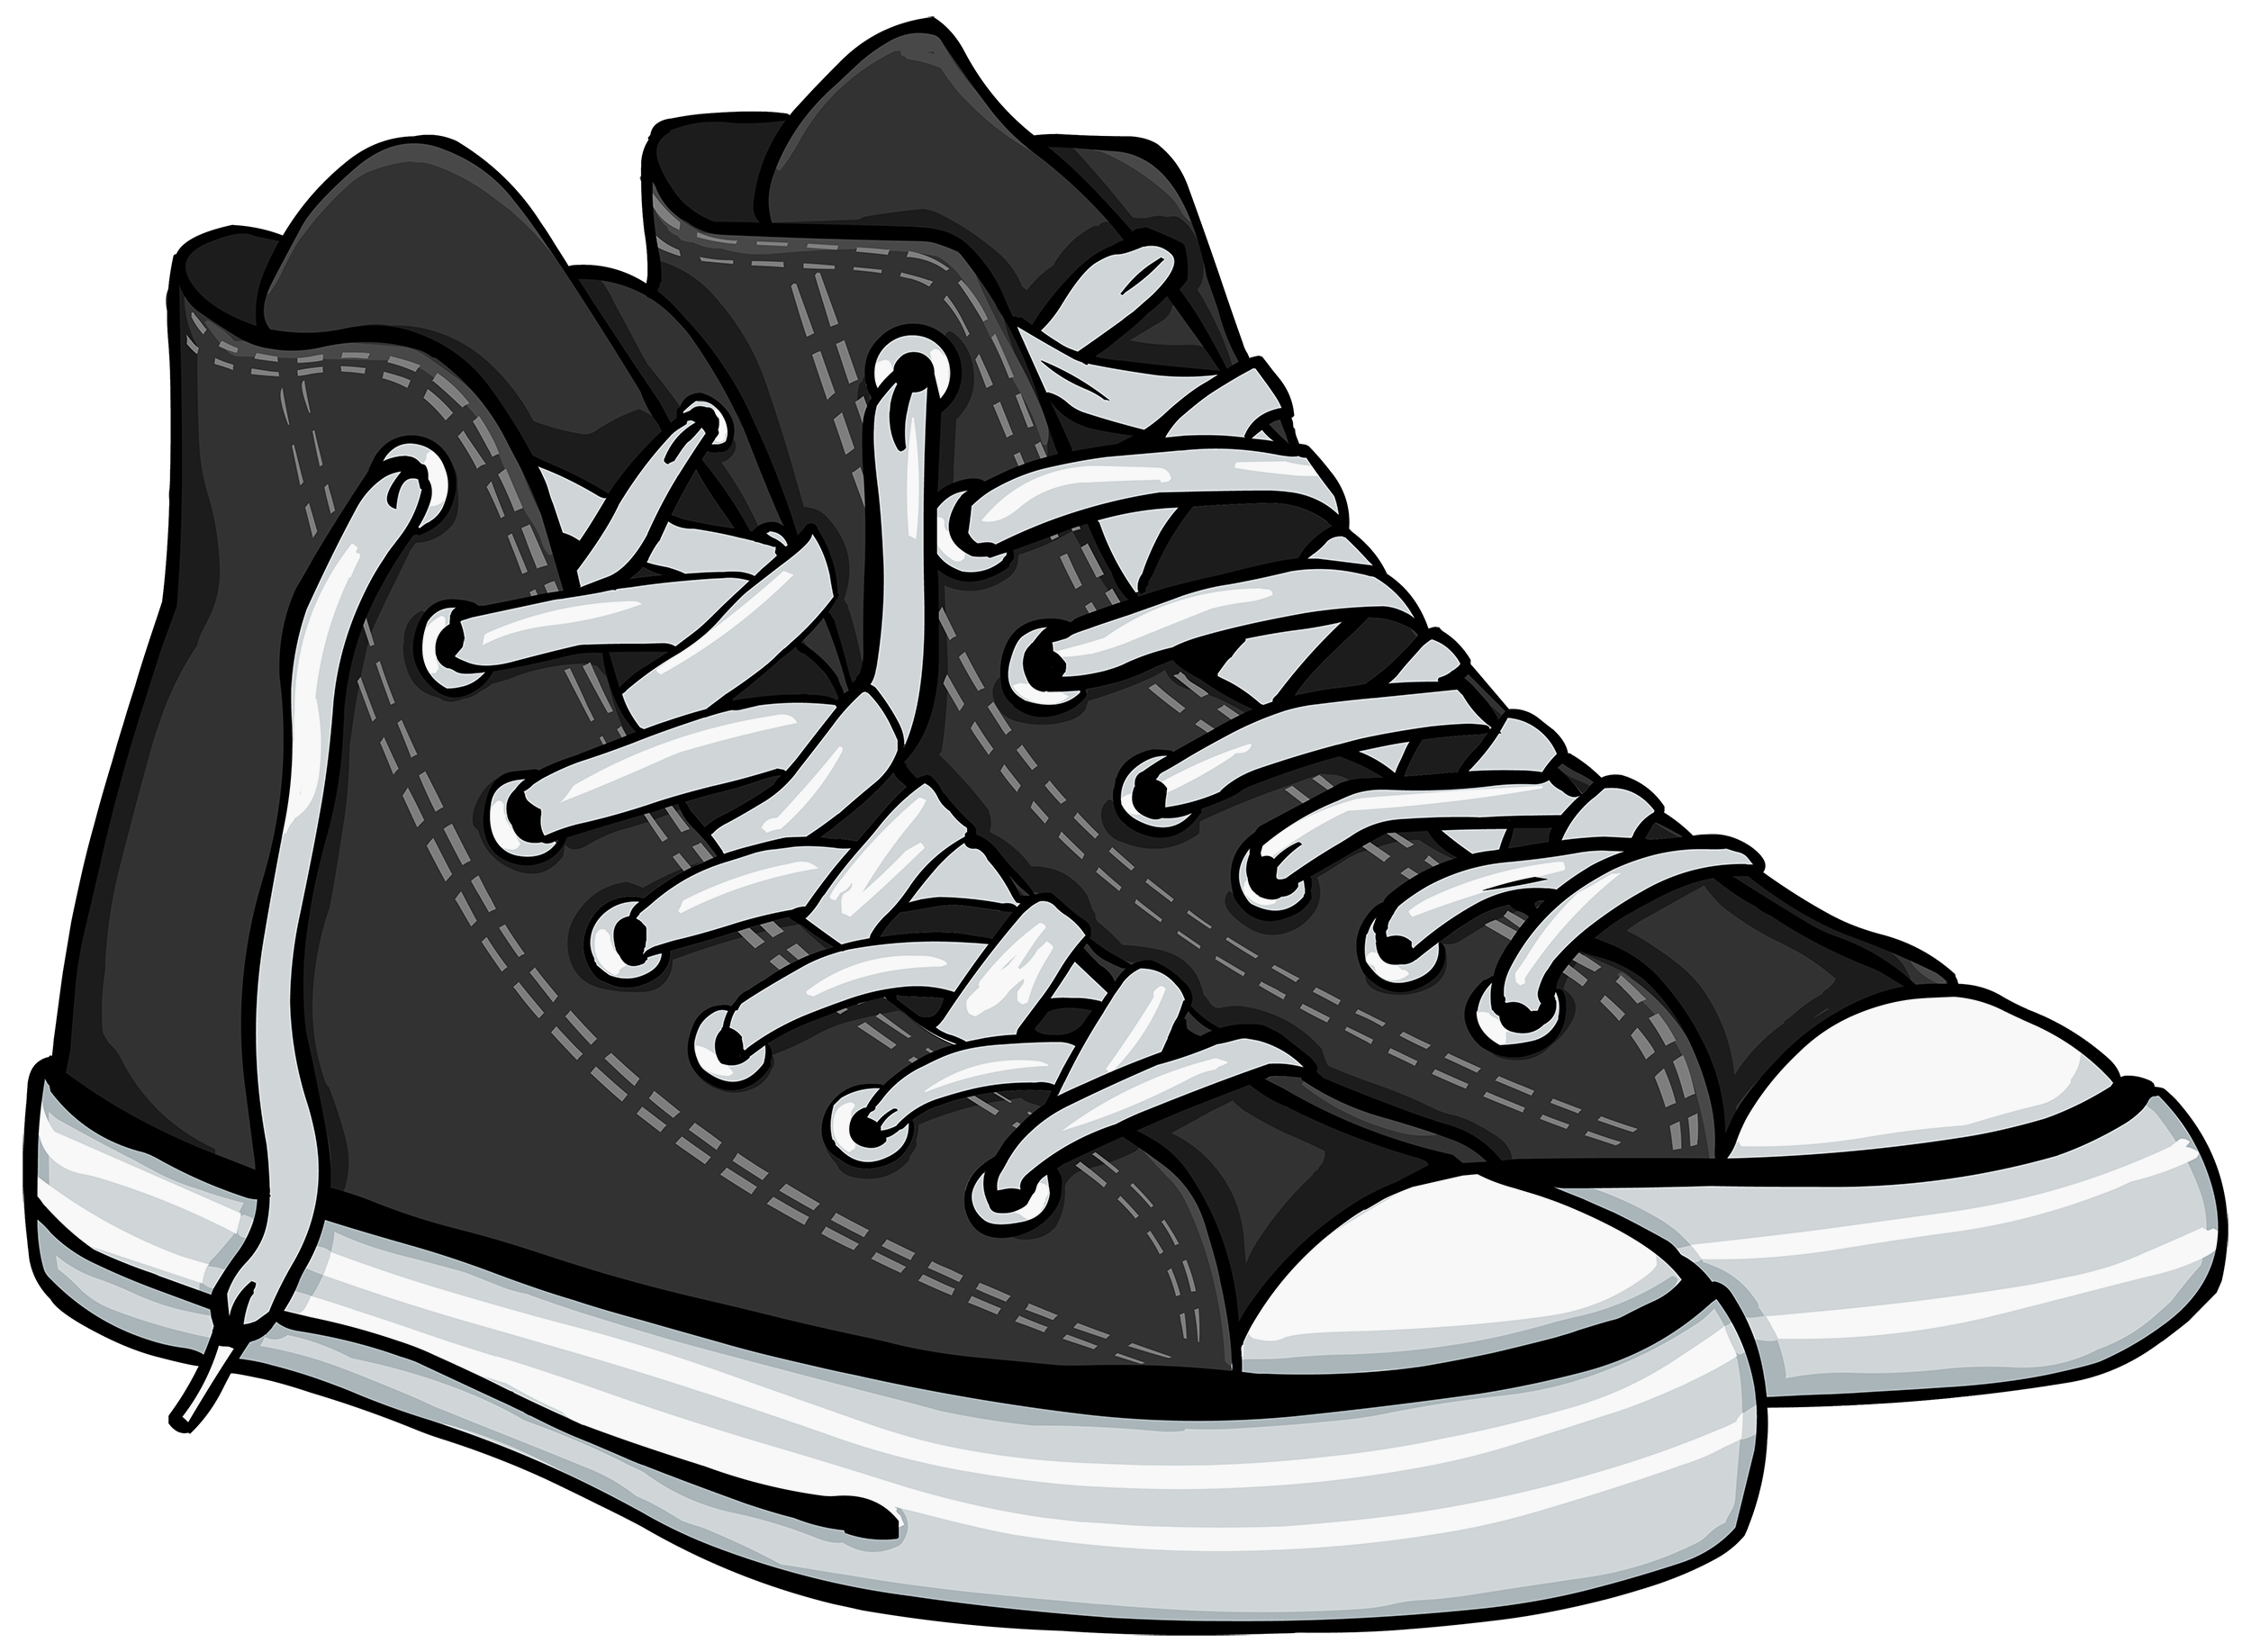 Converse clipart template. Black high sneakers png